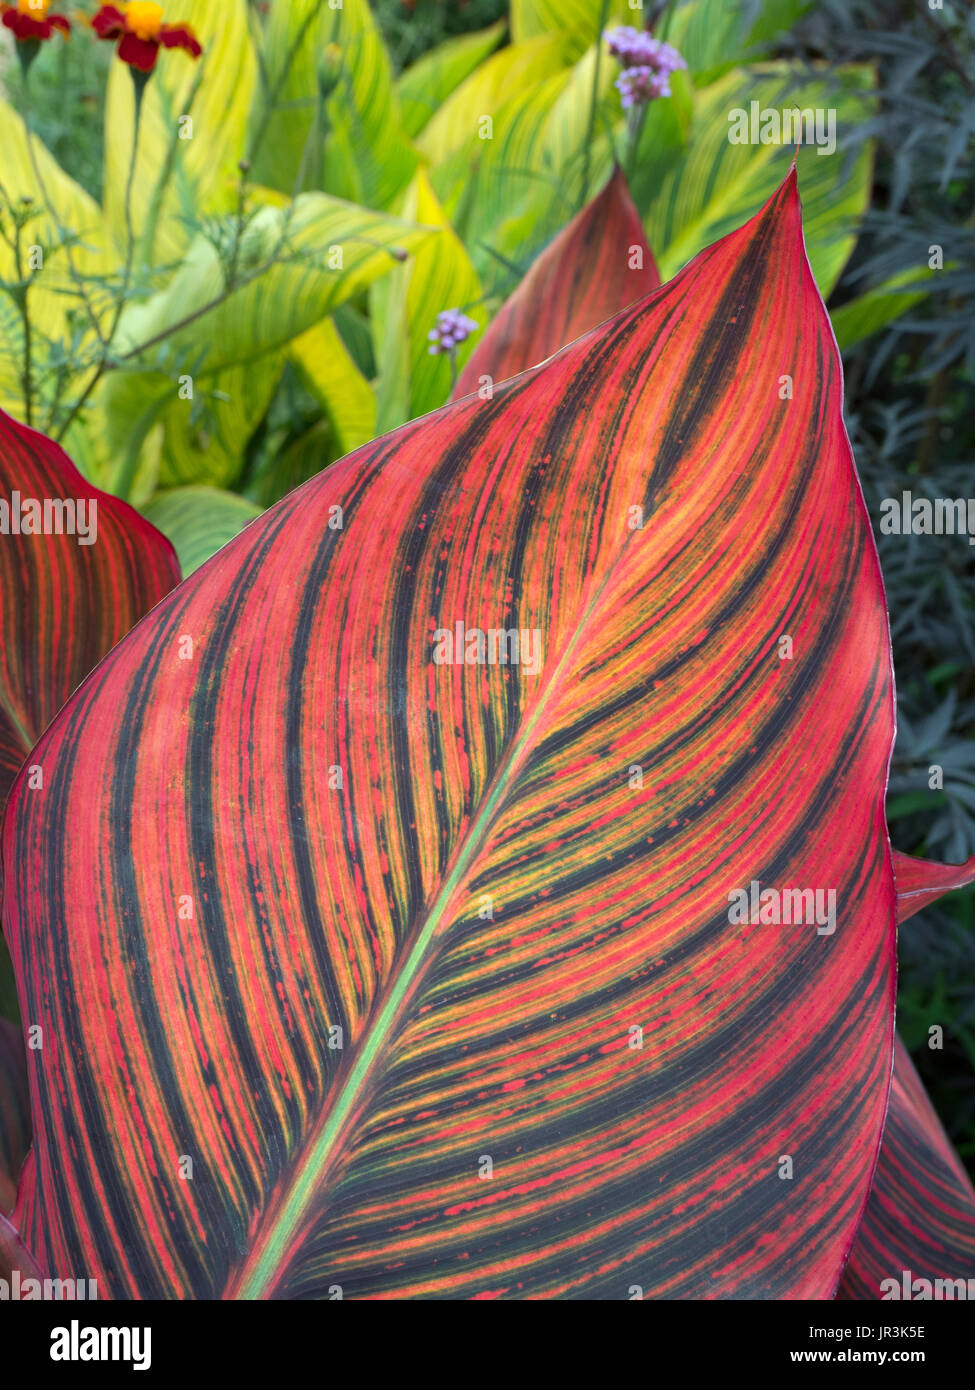 Canna Lily Leaf Close Up In Garden Border Stock Photo Alamy